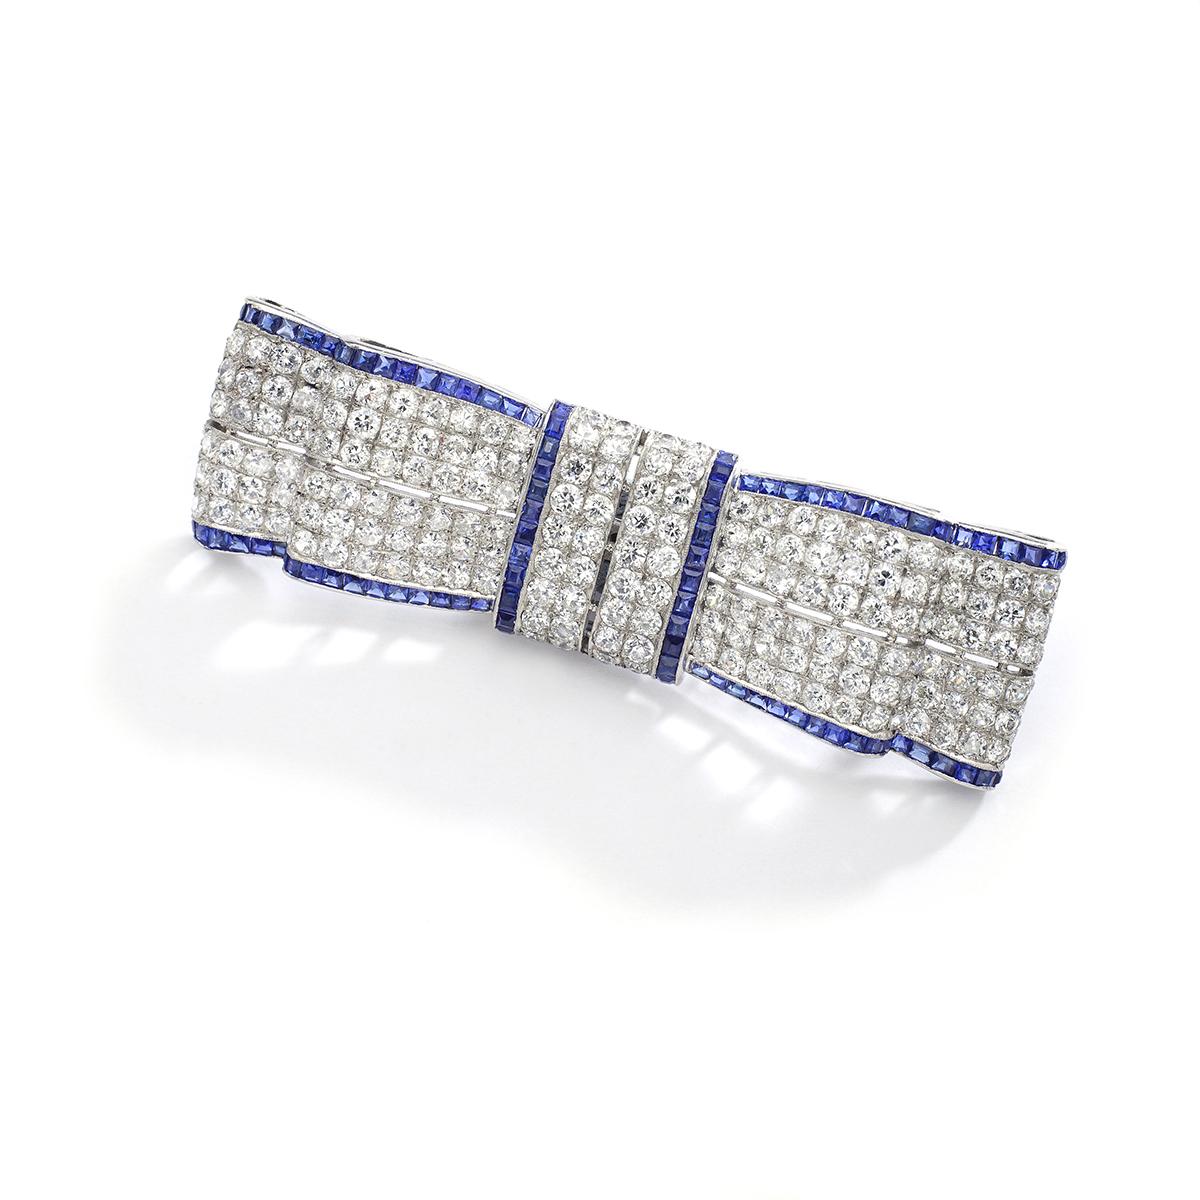 Former property of an English Gentleman.
Elegant and Stunning as usual Art Deco design is one of our favorite period.
Bow tie brooch in diamond and calibrated sapphires. Circa 1930.
French mark for platinum.

Measures:
Length: 6.5 centimeters (2.6